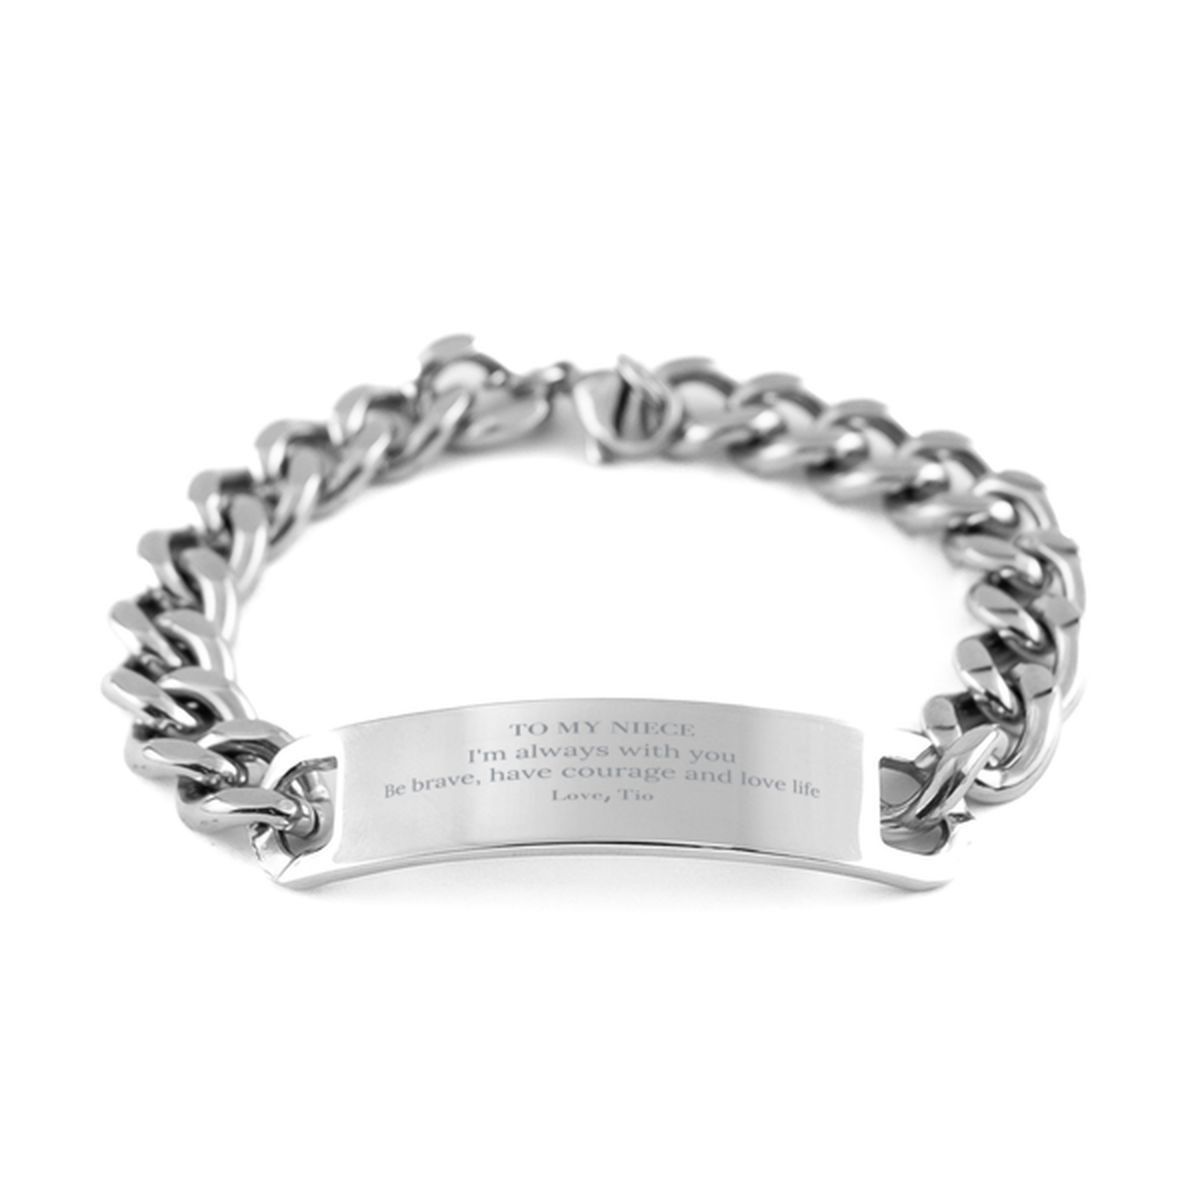 To My Niece Gifts from Tio, Unique Cuban Chain Stainless Steel Bracelet Inspirational Christmas Birthday Graduation Gifts for Niece I'm always with you. Be brave, have courage and love life. Love, Tio